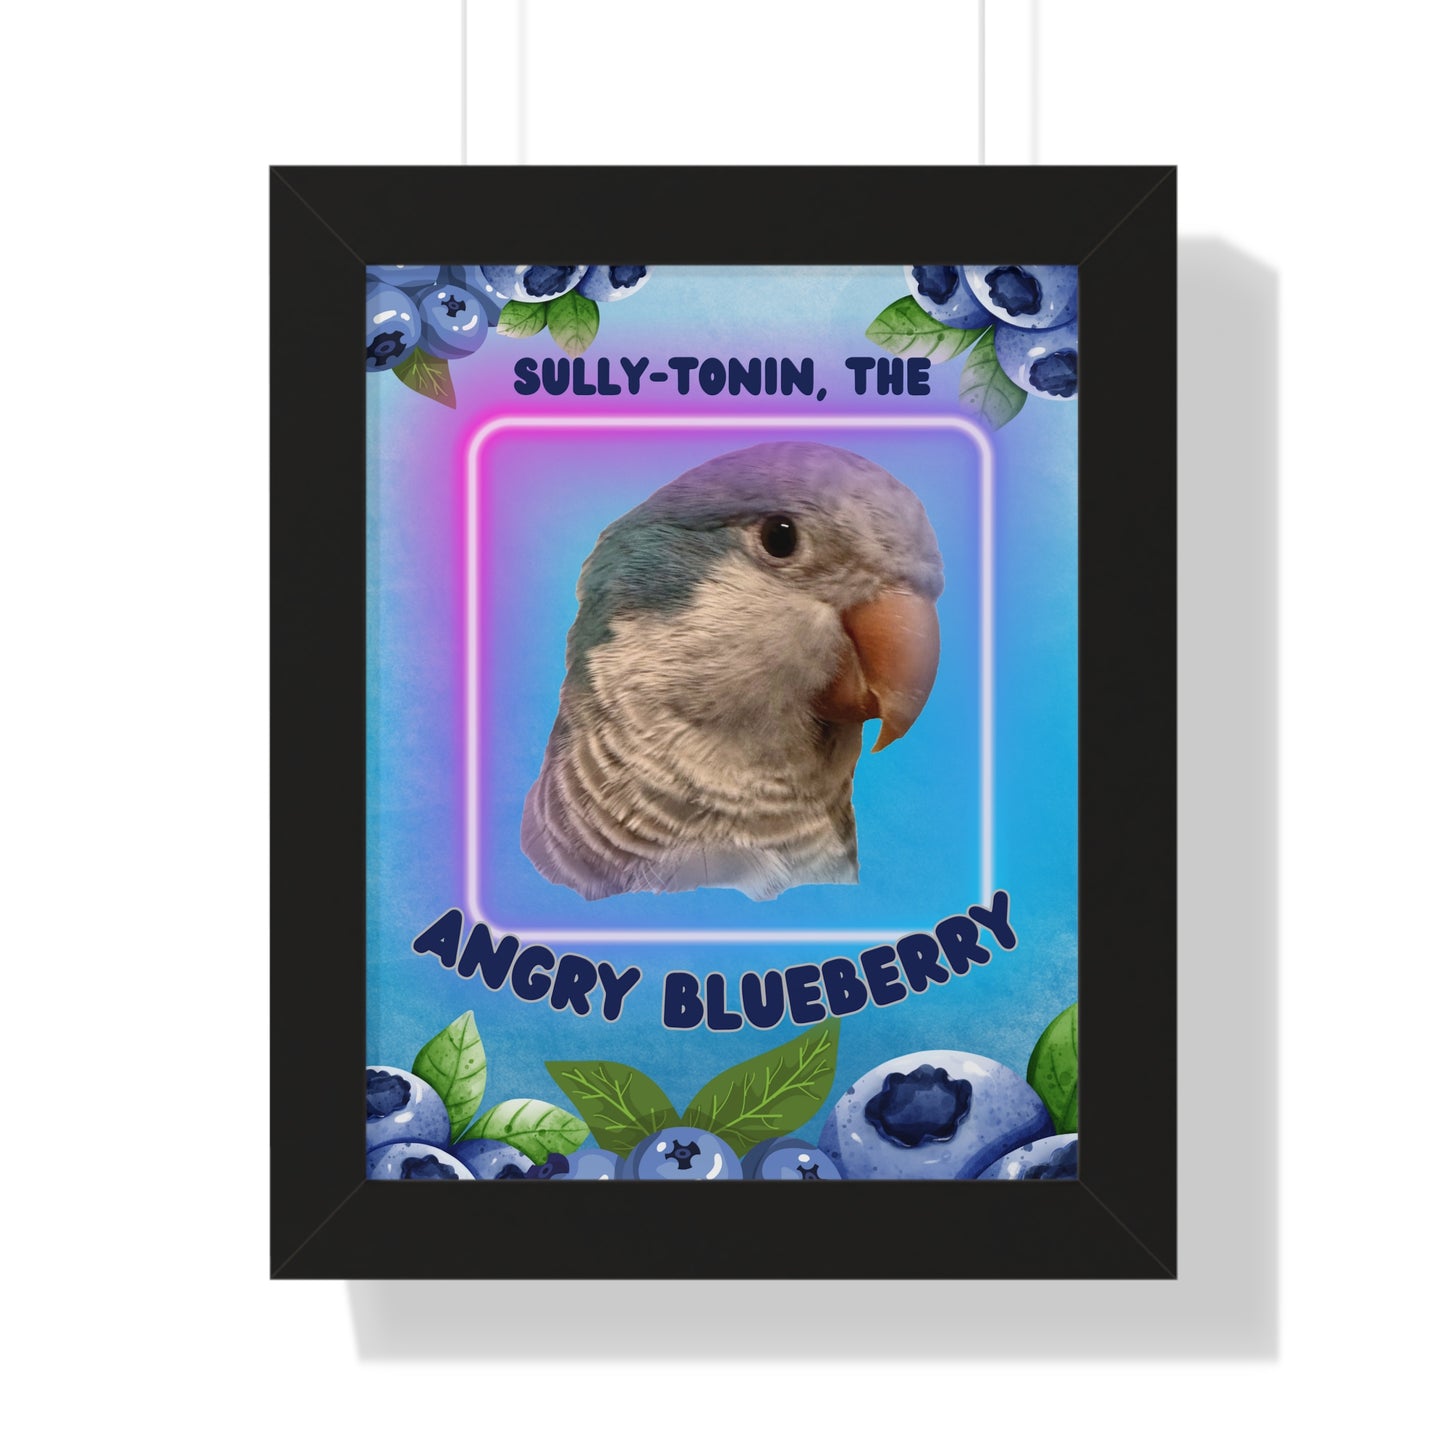 Sullytonin the Angry Blueberry Quaker Parrot Framed Vertical Poster, Birds of Valhalla, Poster, Printify